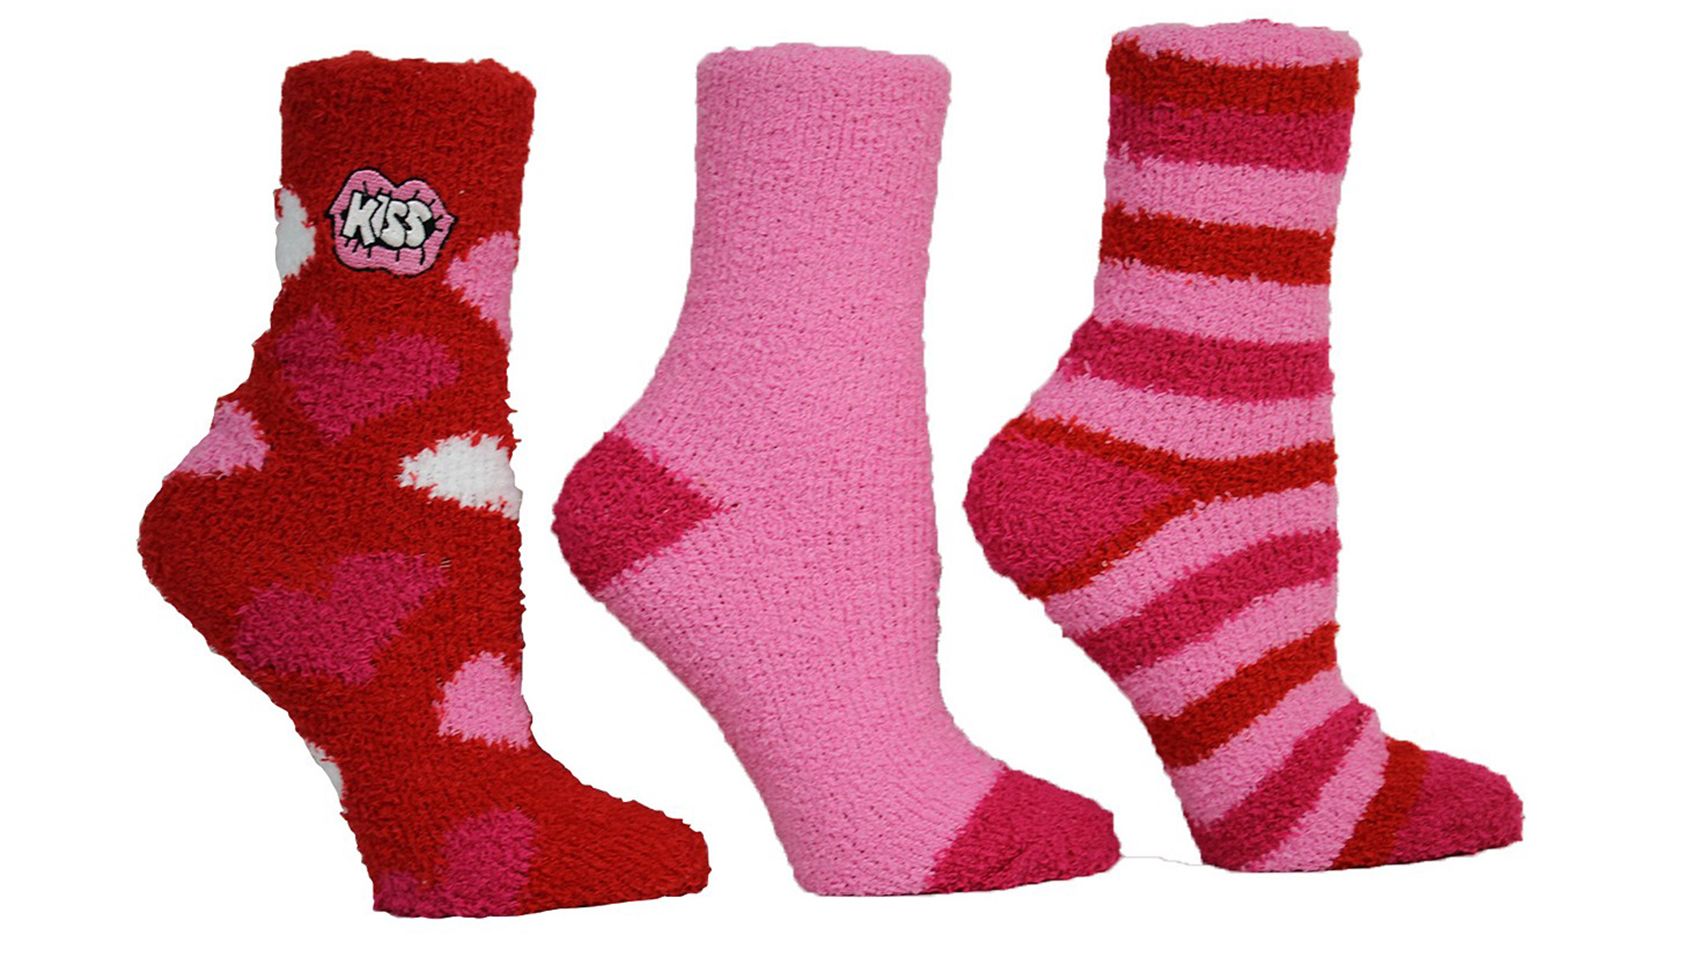 Buy Bright Star Super Hairy Cosy Socks 2 Pack from Next USA